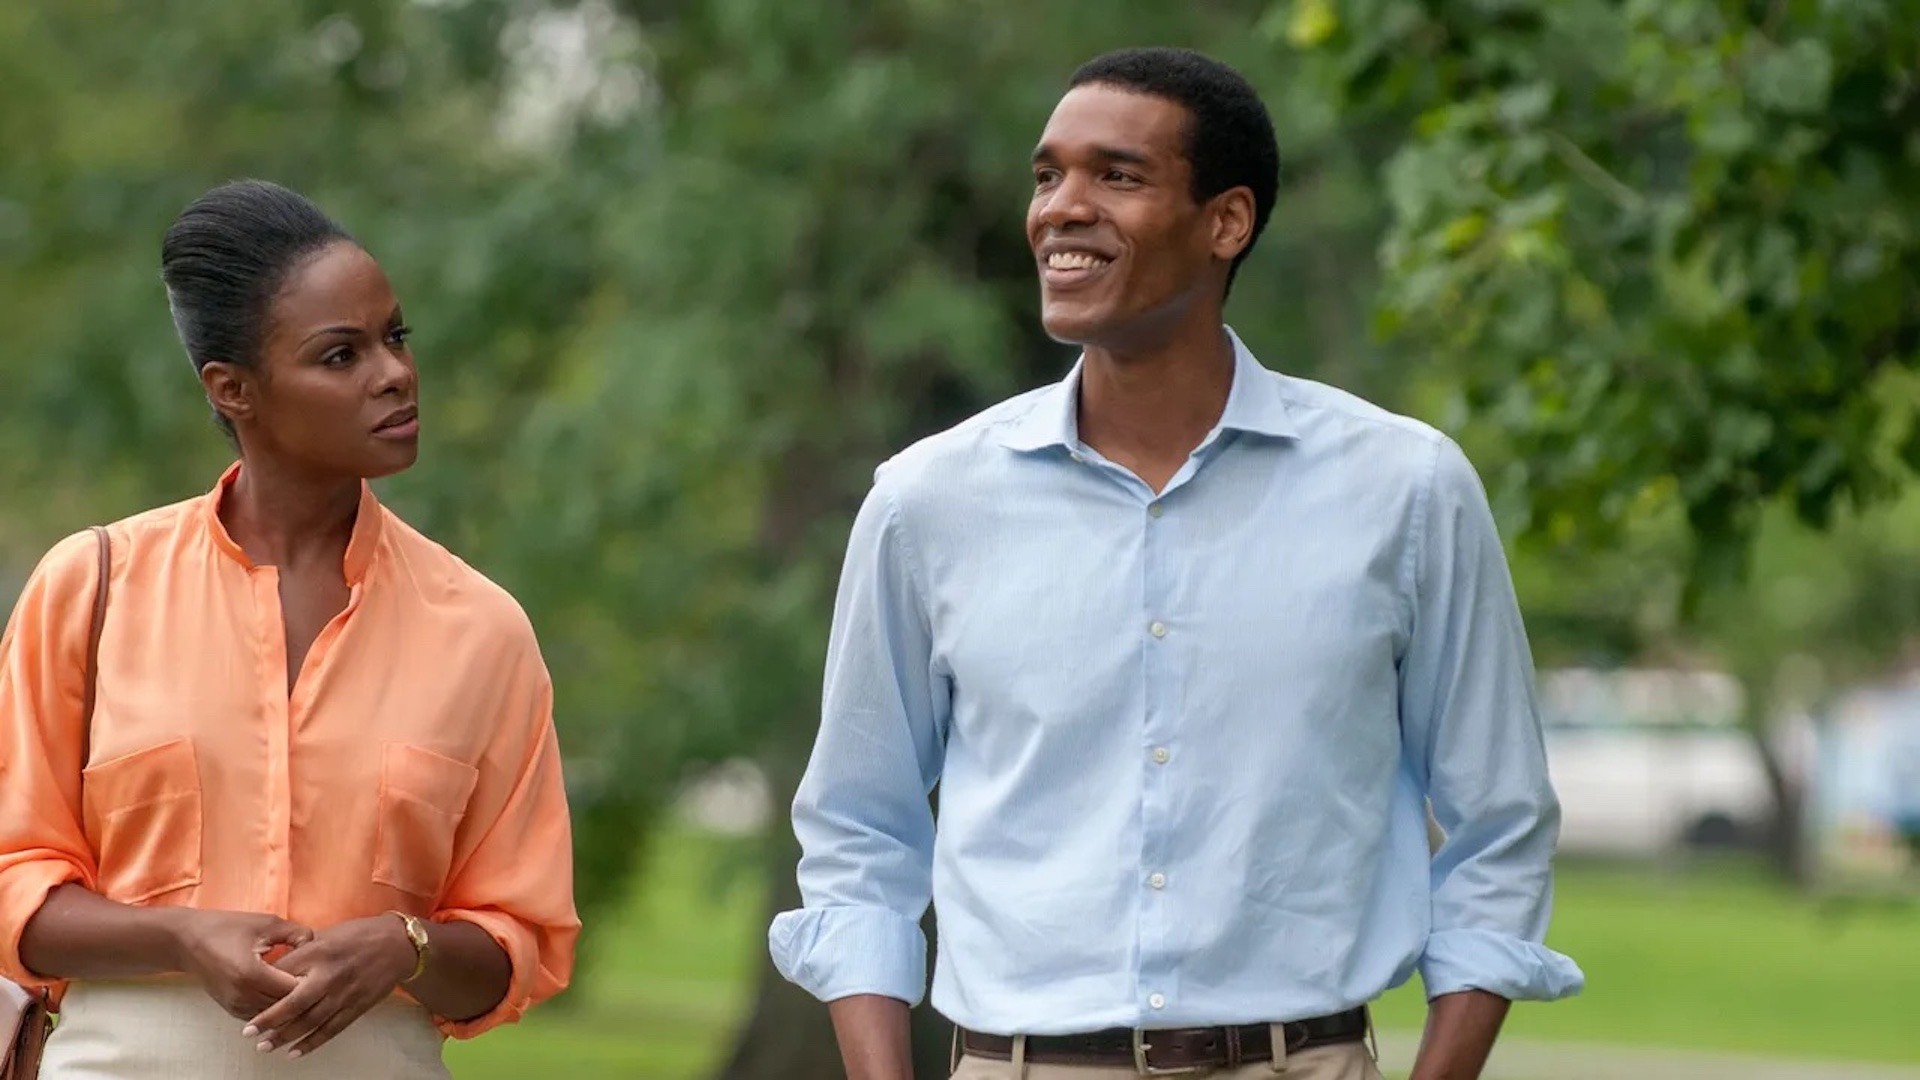 Parker Sawyers as Barack Obama and Tika Sumpter as Michelle Robinson walking and talking in 'Southside with You;' Punching Above Your Weight: How 'I Play Rocky' Makes a Case for Writing Biopics